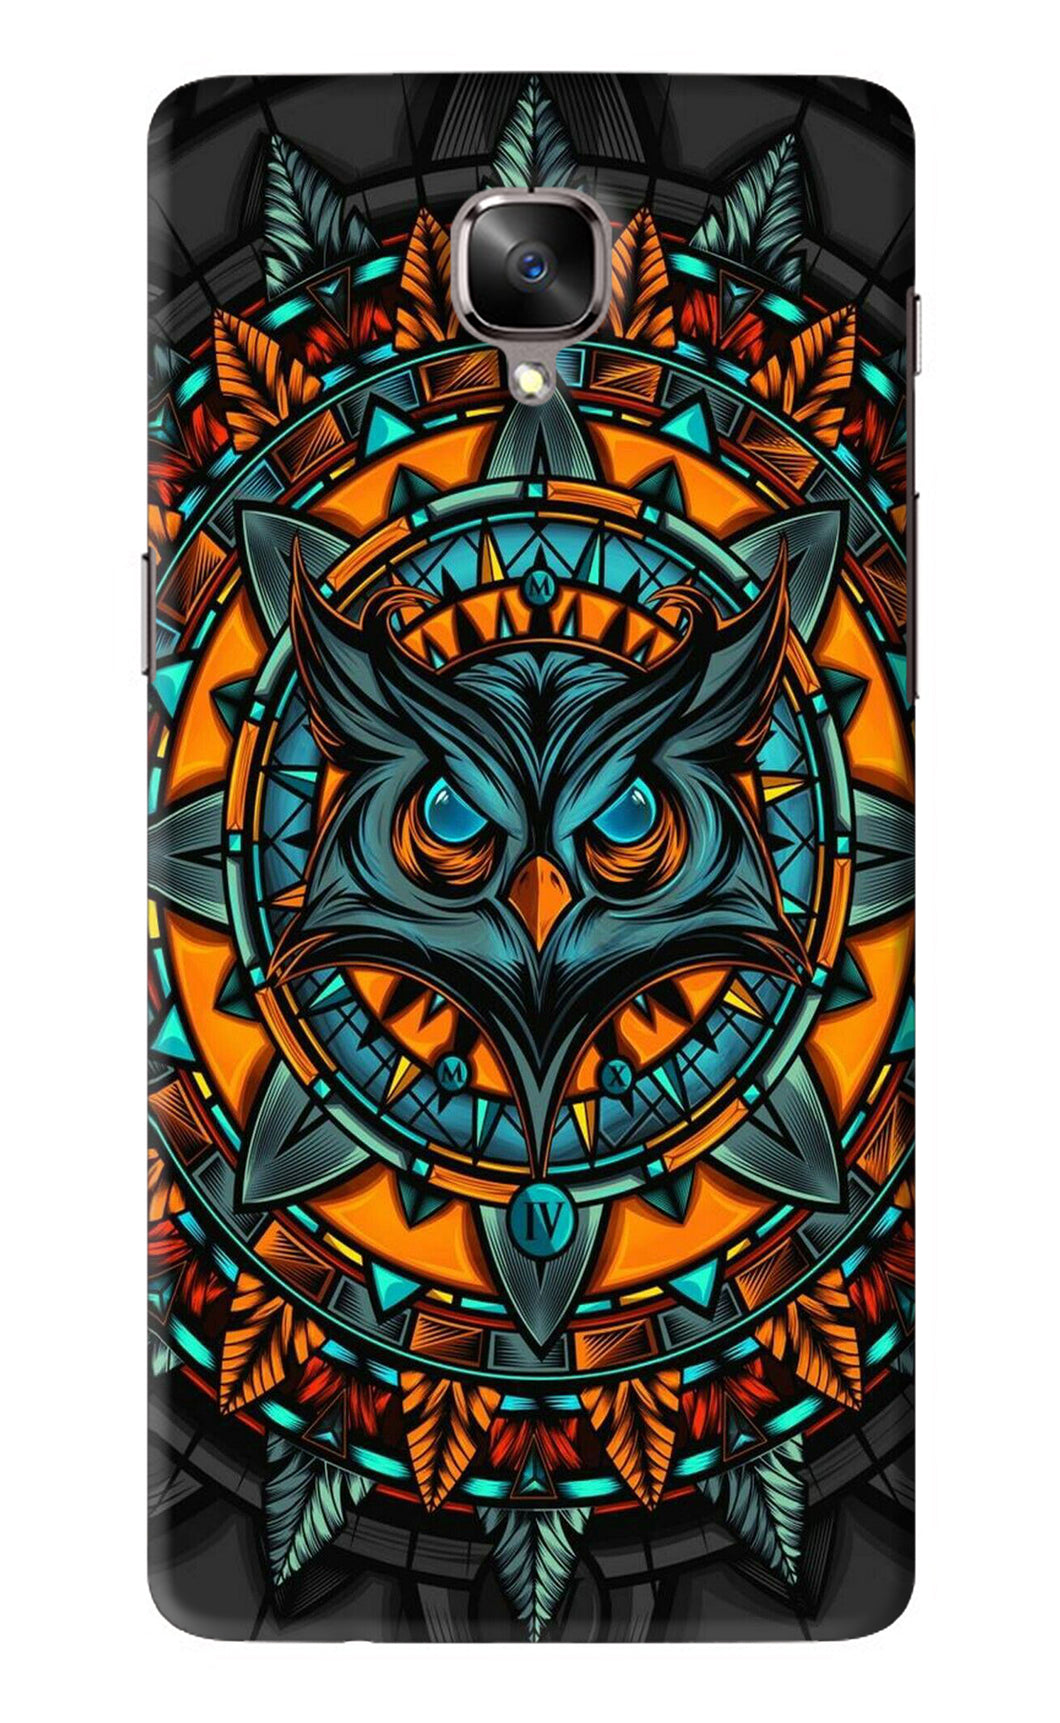 Angry Owl Art OnePlus 3T Back Skin Wrap